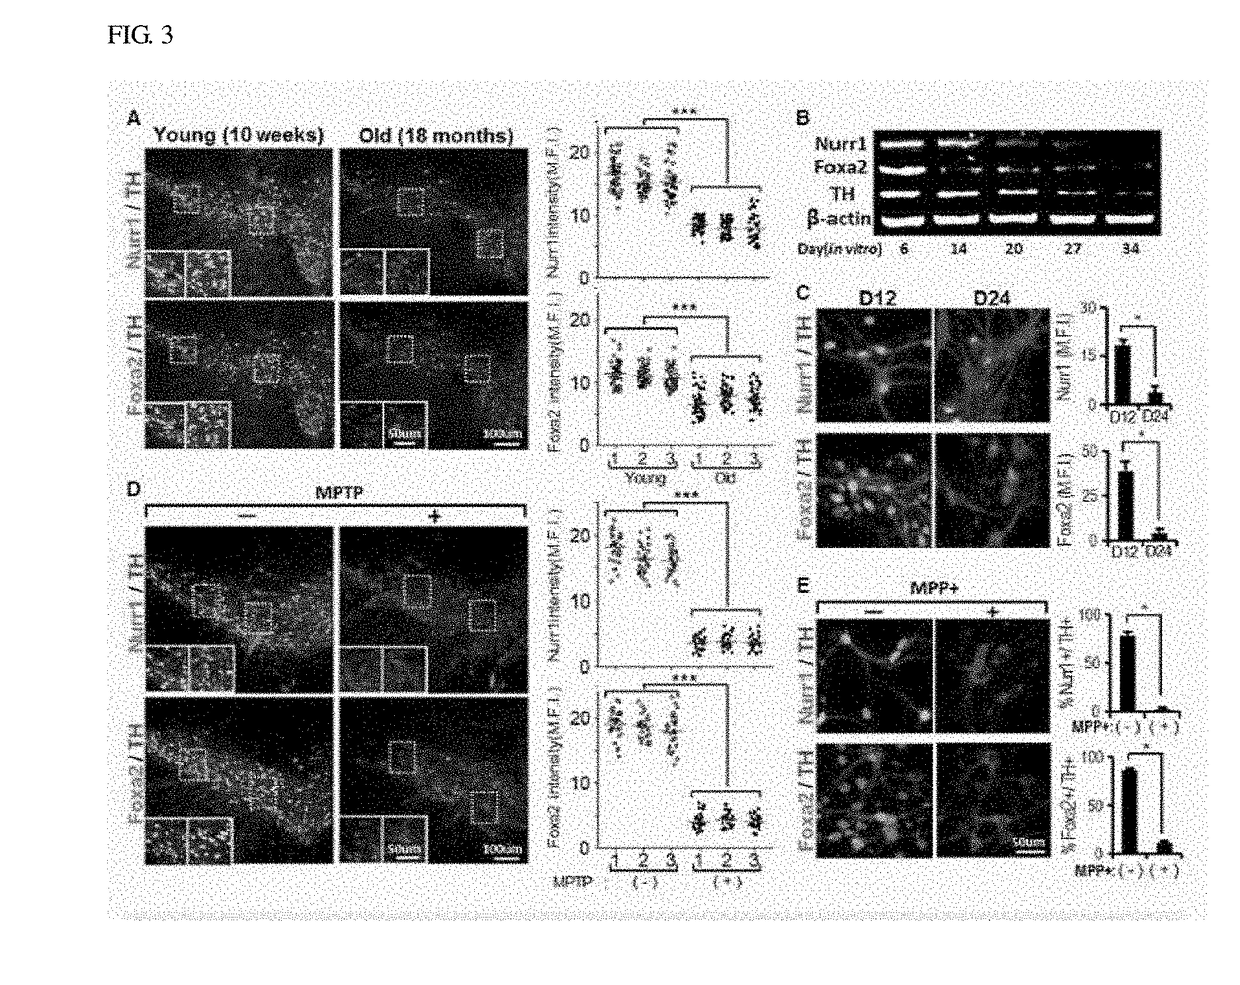 Therapeutic effects of nurr1 and foxa2 in inflammatory neurologic disorders by m1-to-m2 polarization of glial cells